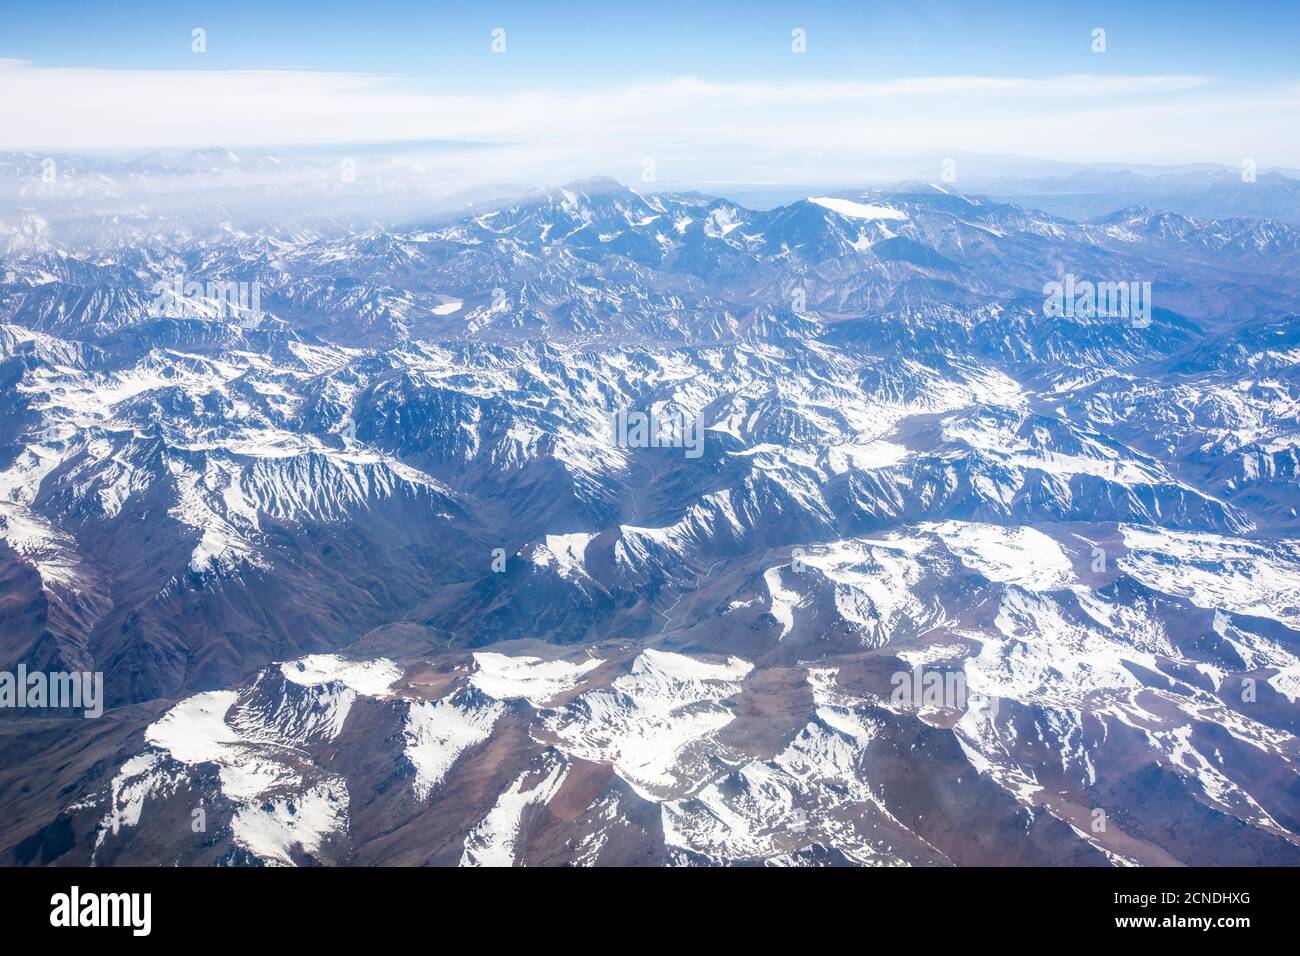 Aerial view of the snow-capped Andes Mountain Range, Chile Stock Photo